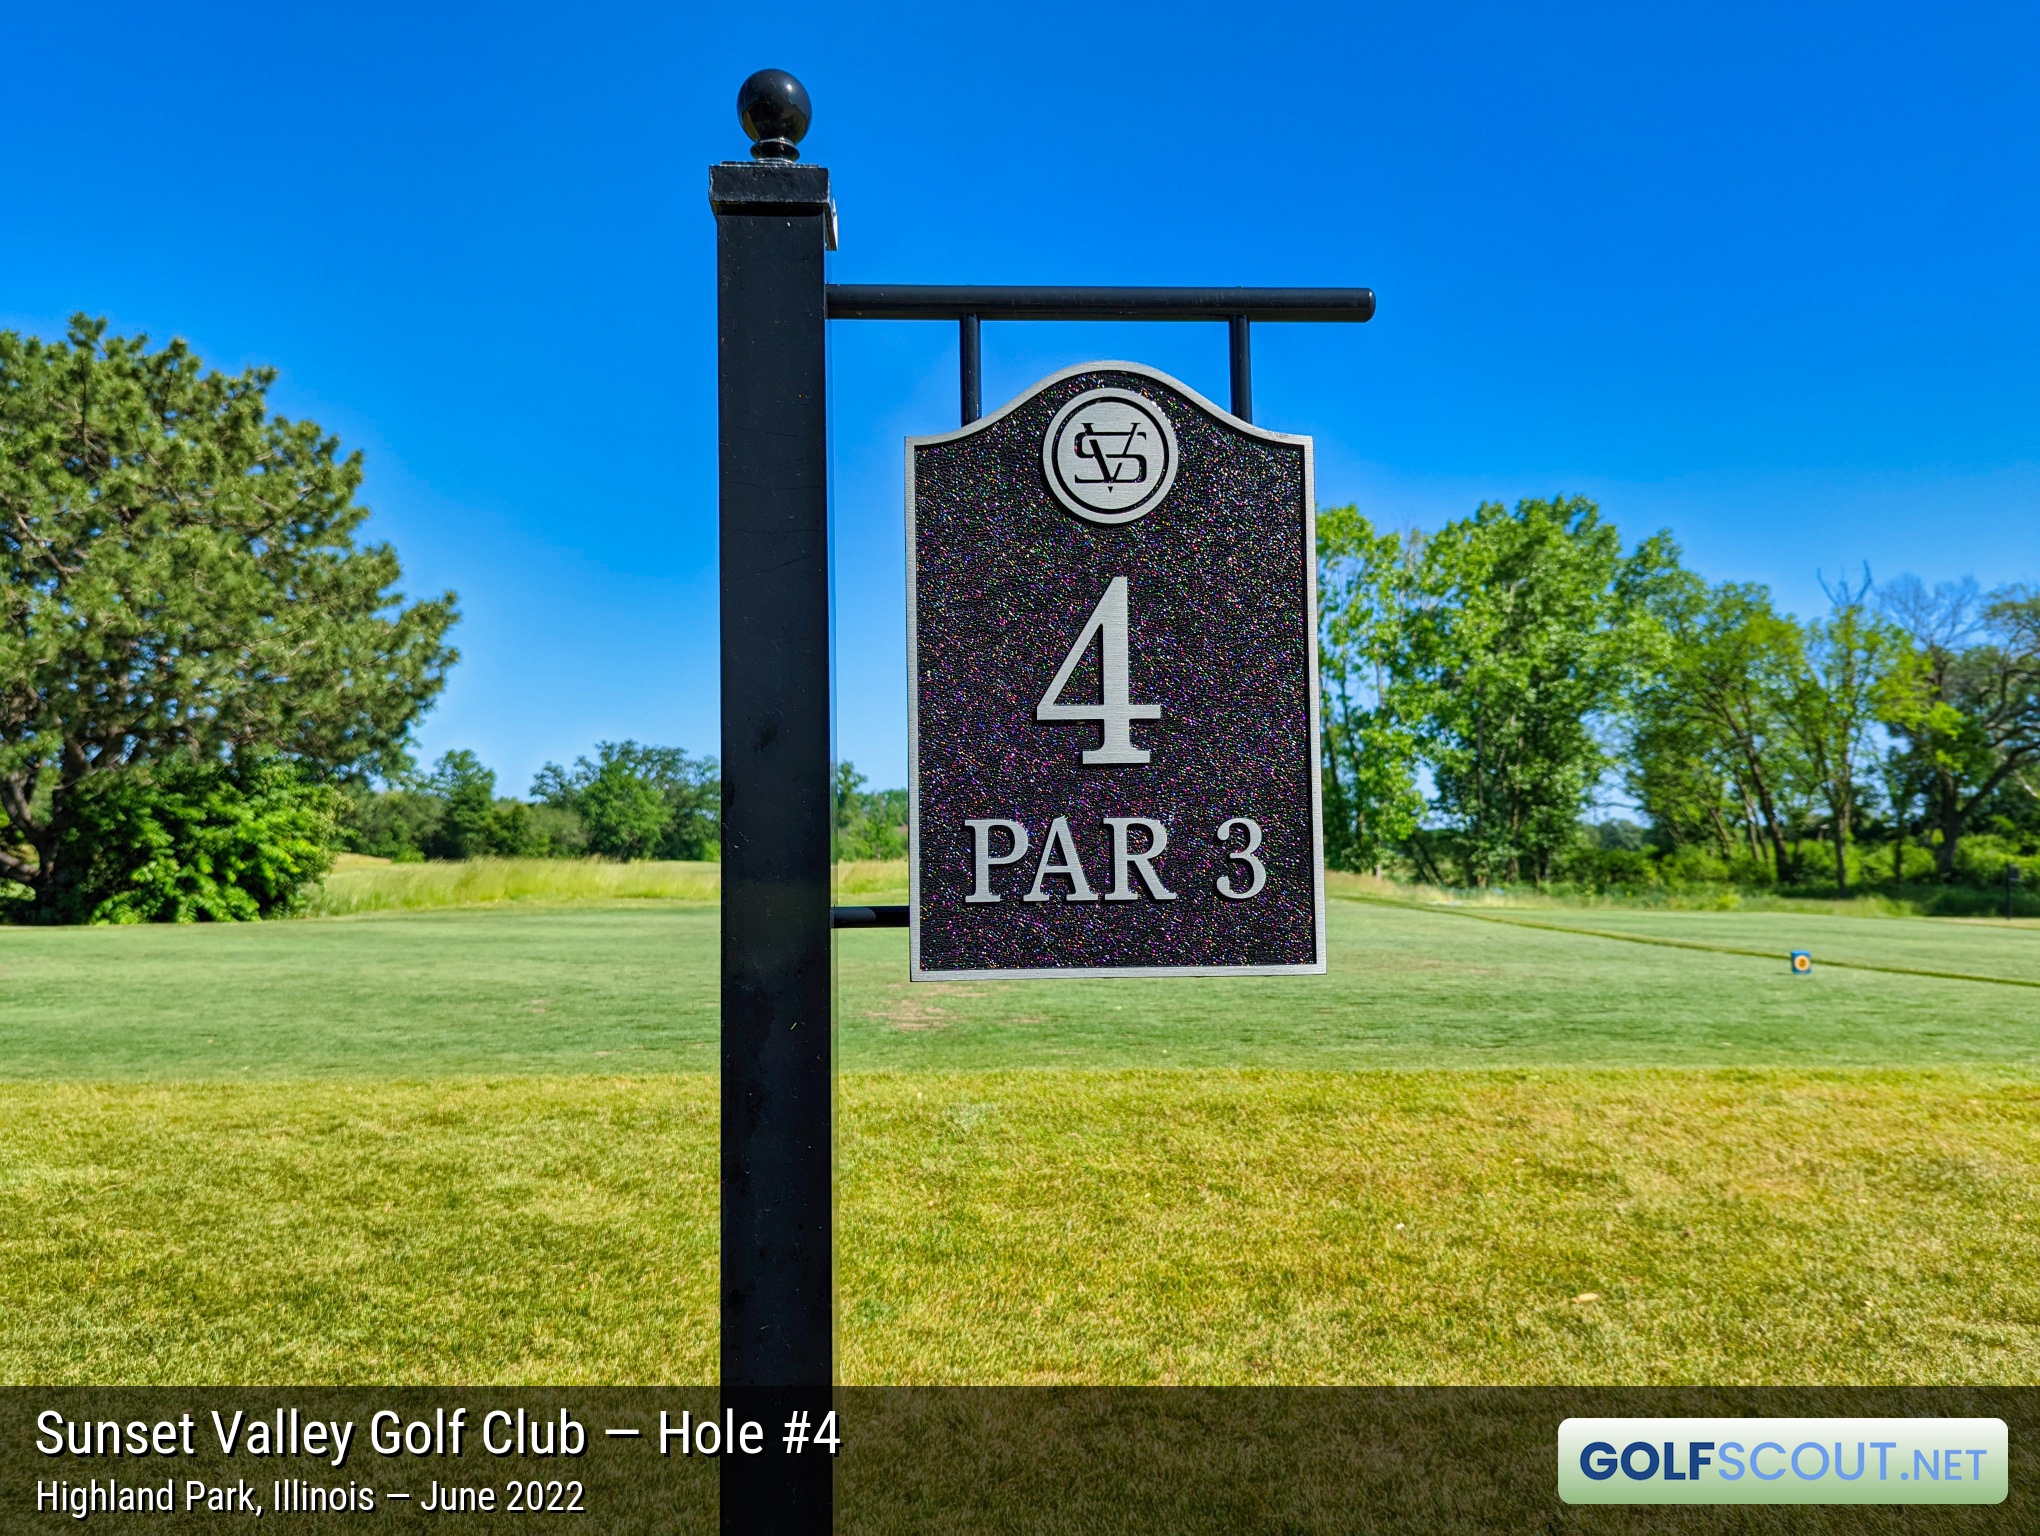 Photo of hole #4 at Sunset Valley Golf Club in Highland Park, Illinois. 